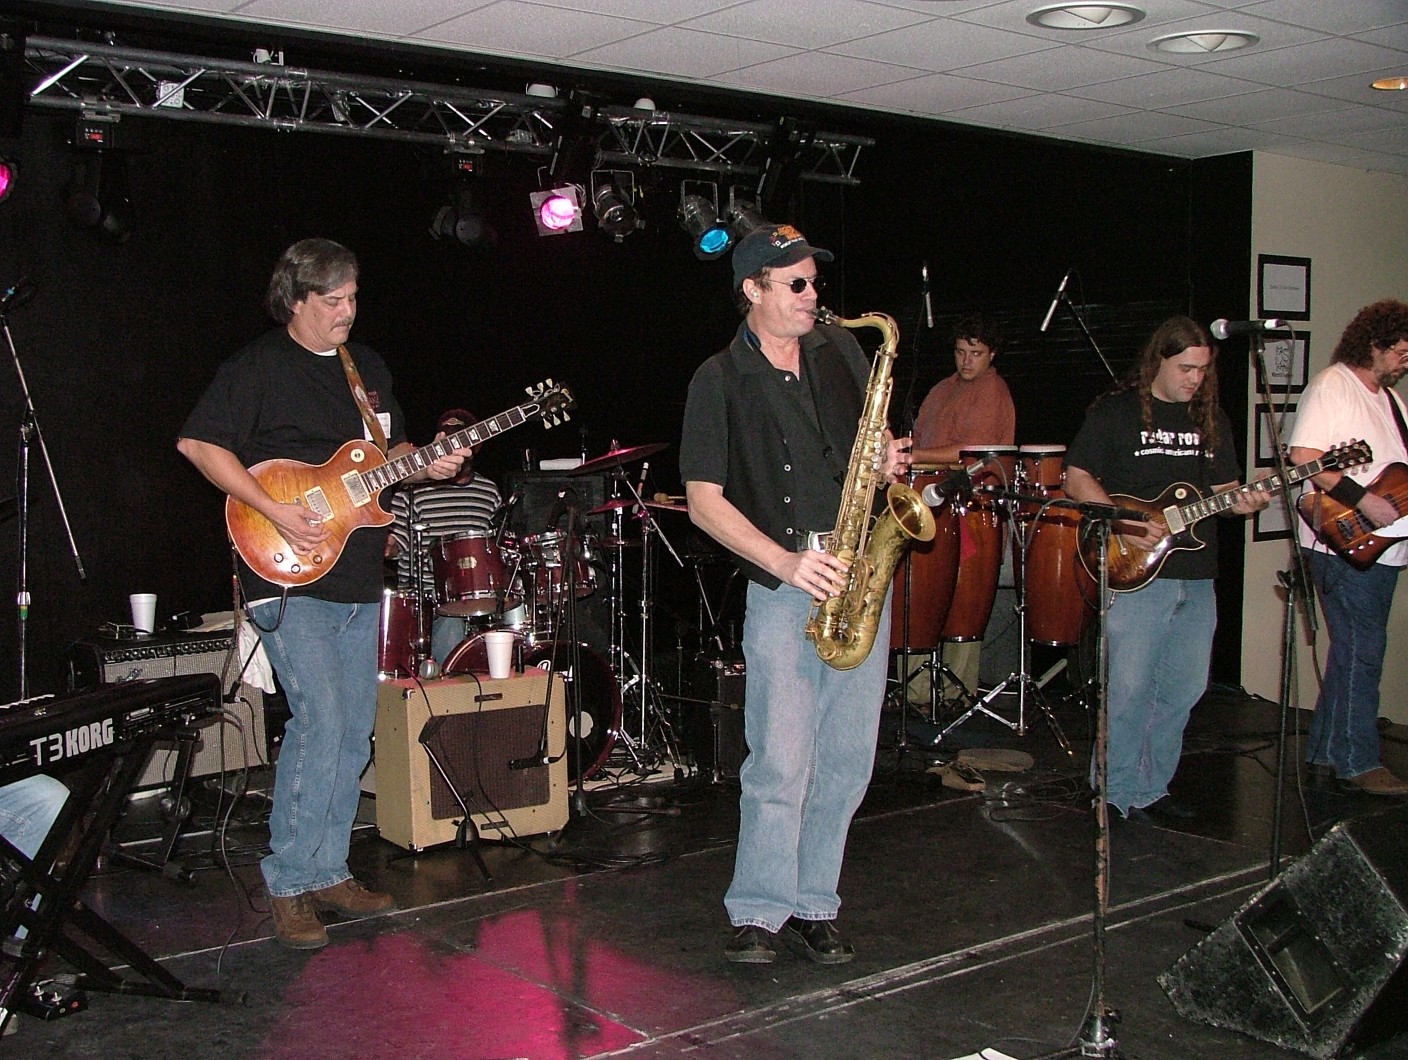 Brent Sibley's (left) Skydogs with Jimmy Hall jammin' along at the beginning of The 4th Annual Jam For Duane on Saturday, October 23, 2004. I hope someone recorded the Liz Reed that Jimmy did with these guys. Jimmy nailed it and had an awesome solo, as did Brent and Jonathan and the keys guy whose name escapes me.